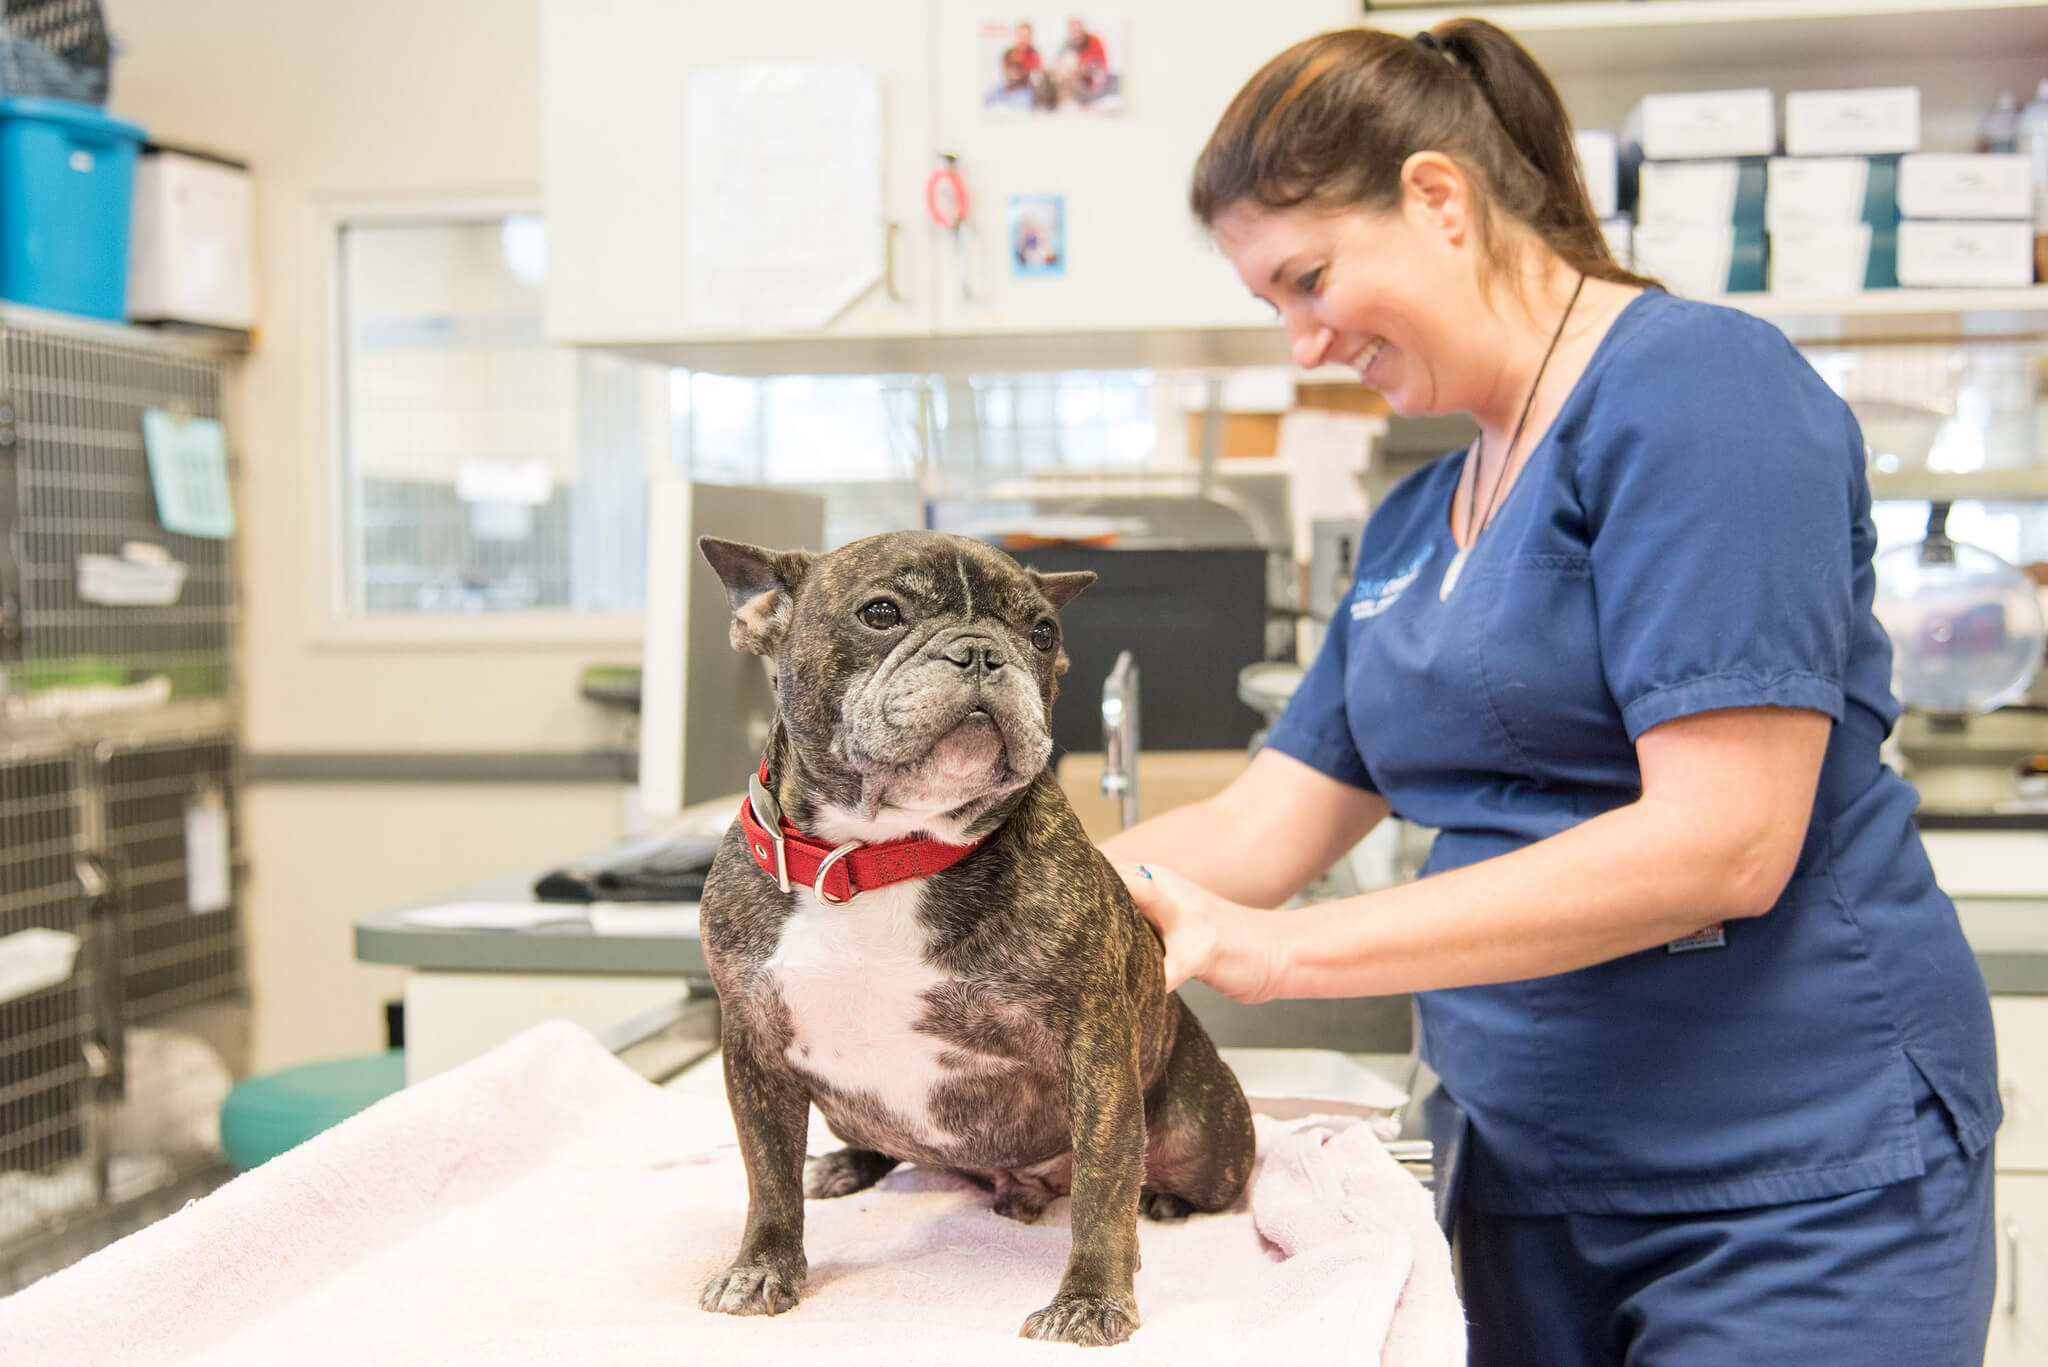 A female veterinarian examines a French bulldog that sits on a table.